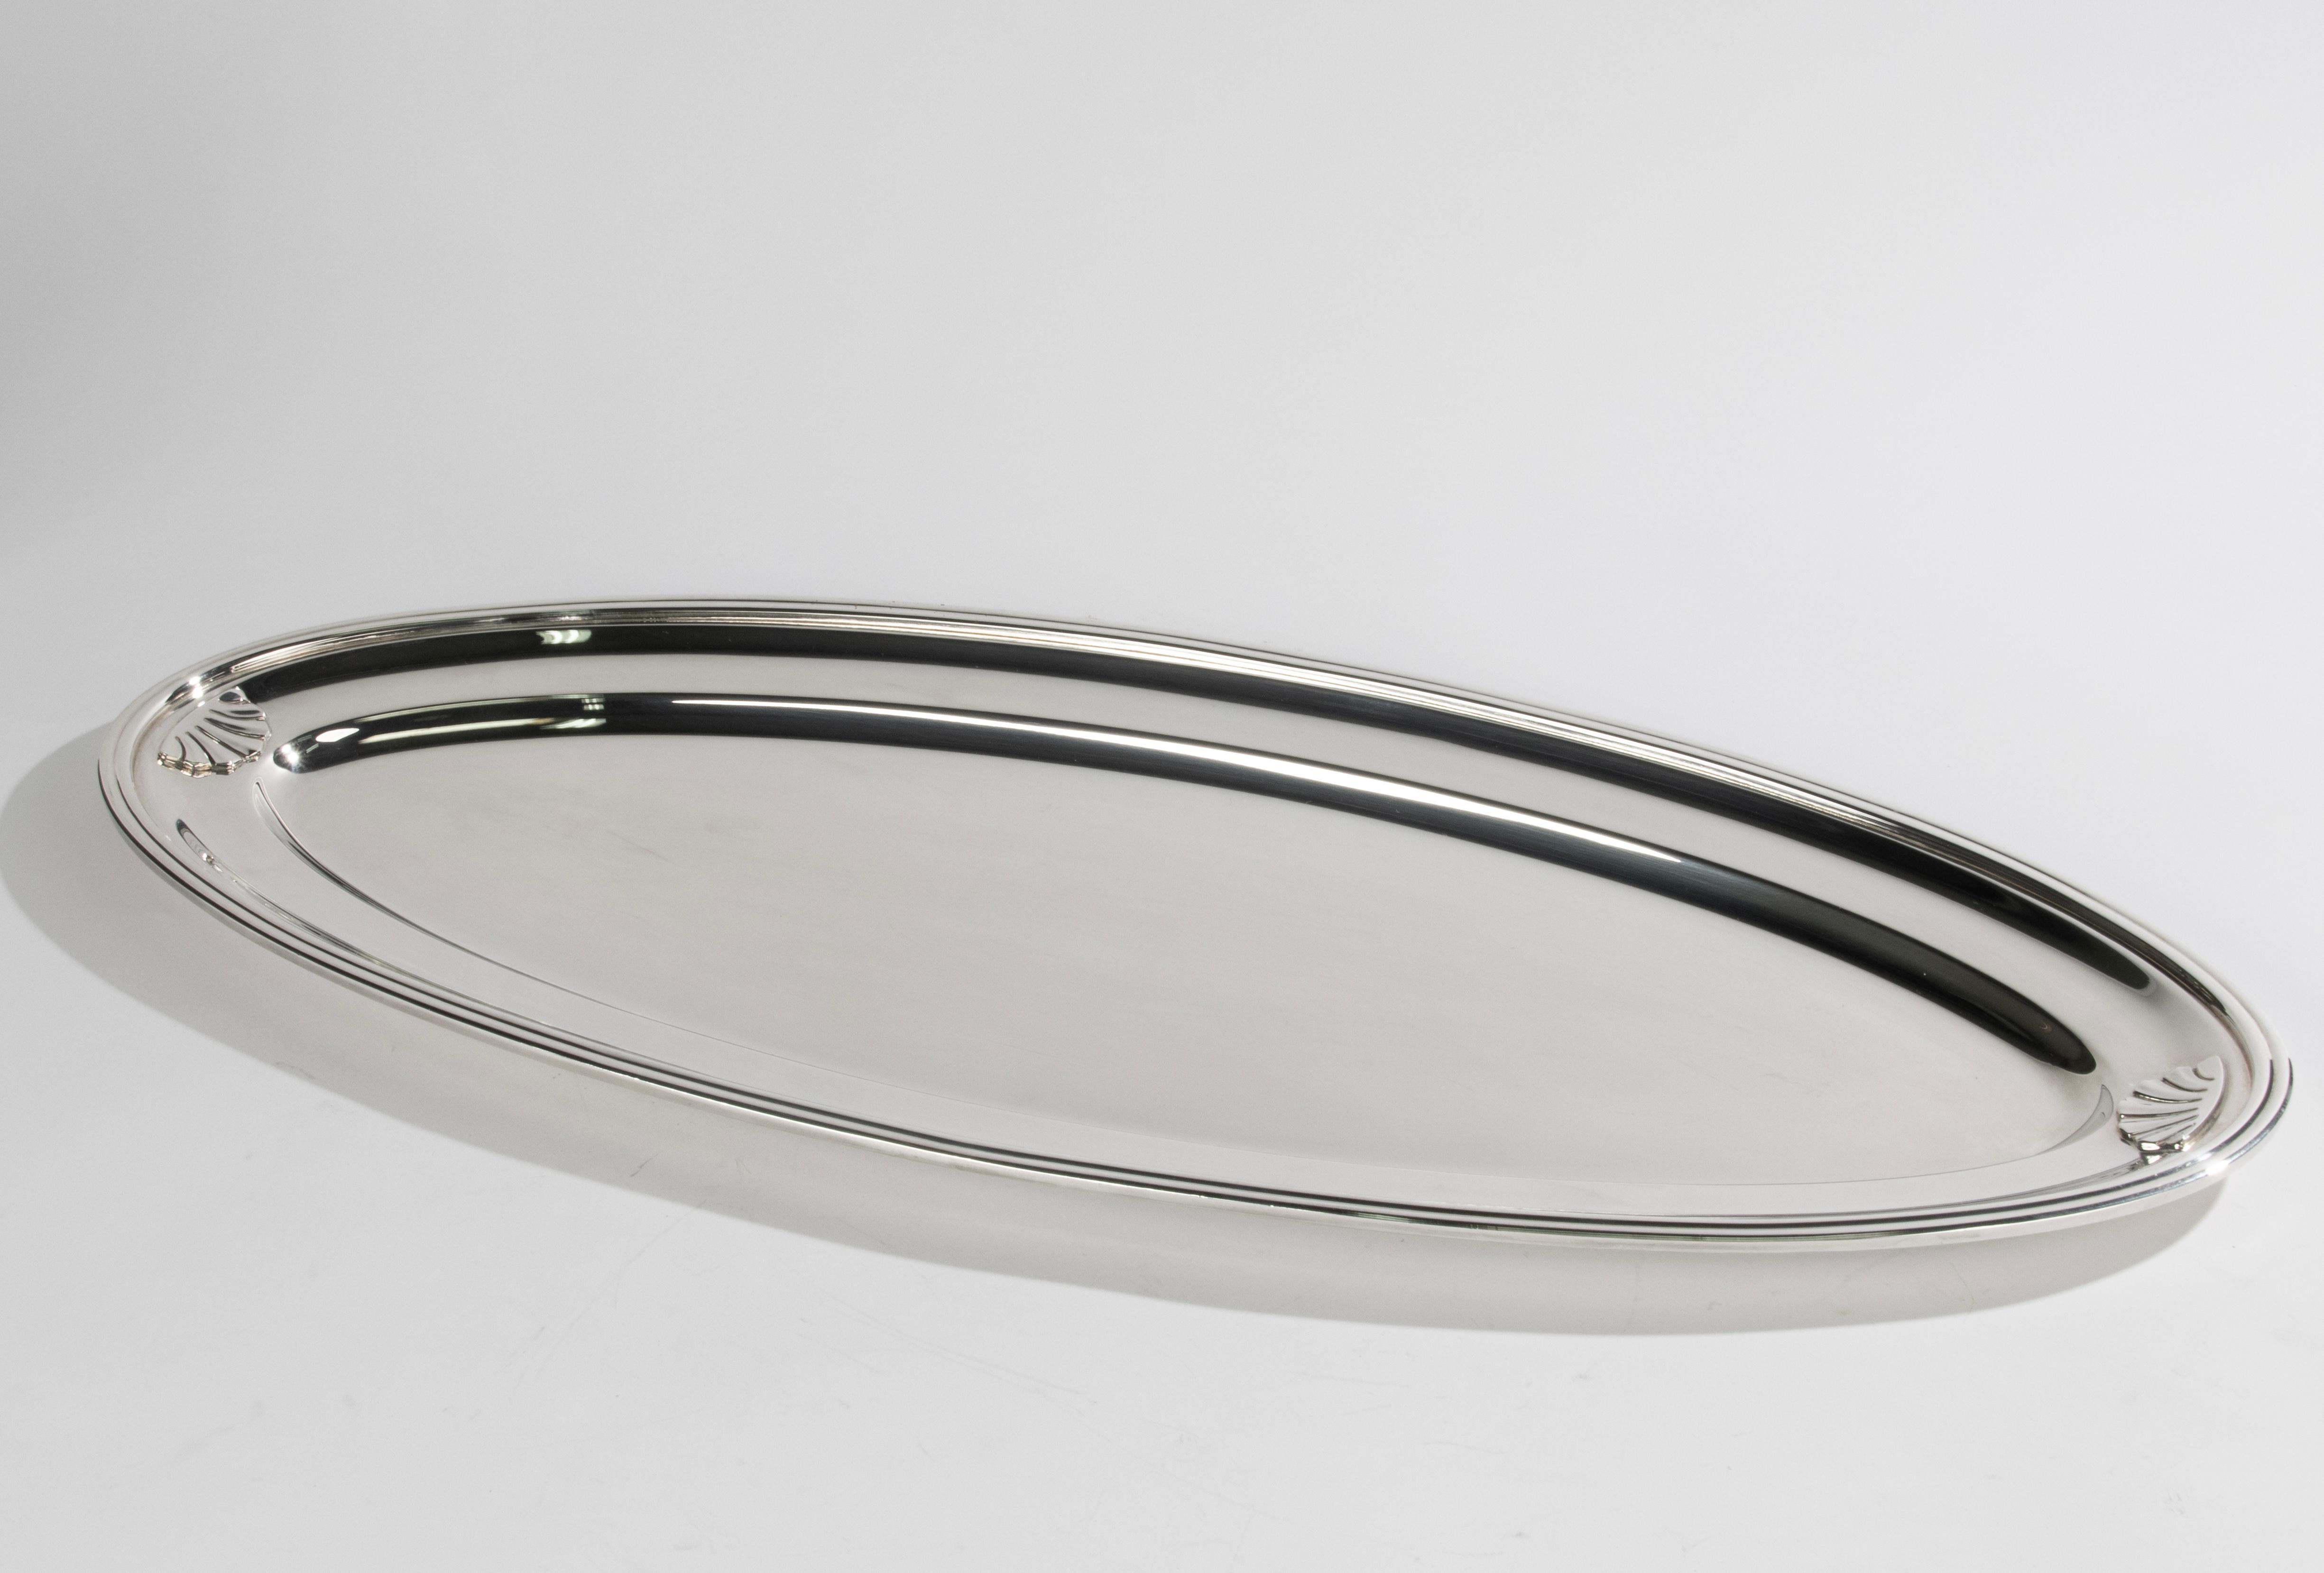 A beautiful large silver-plated tray, from the French brand Christofle.
The tray is in incredibly beautiful condition, it looks as if it has hardly been used. Beautiful color and shine.
This is a large size: 70 x 30 cm / 27,56 x 11,81 inches.
Free